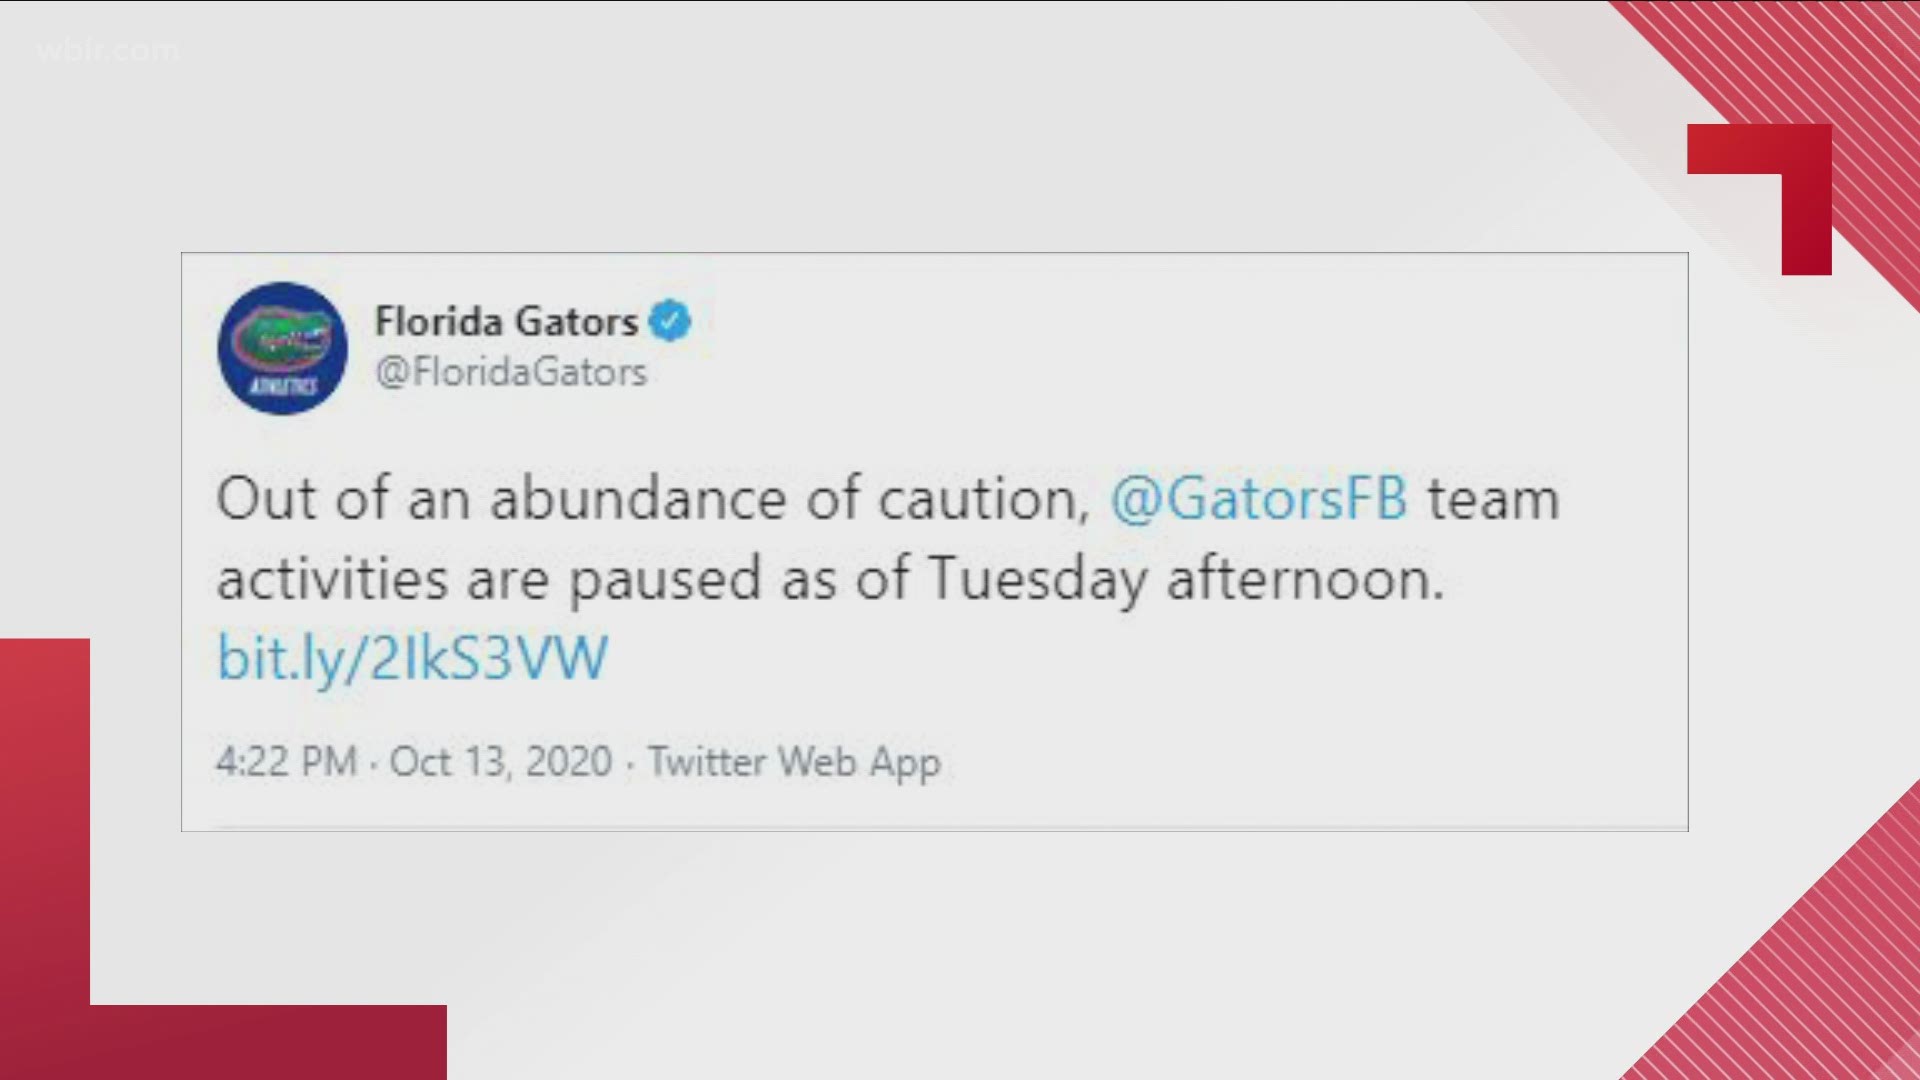 The Gators tweeted it is out of "an abundance of caution."